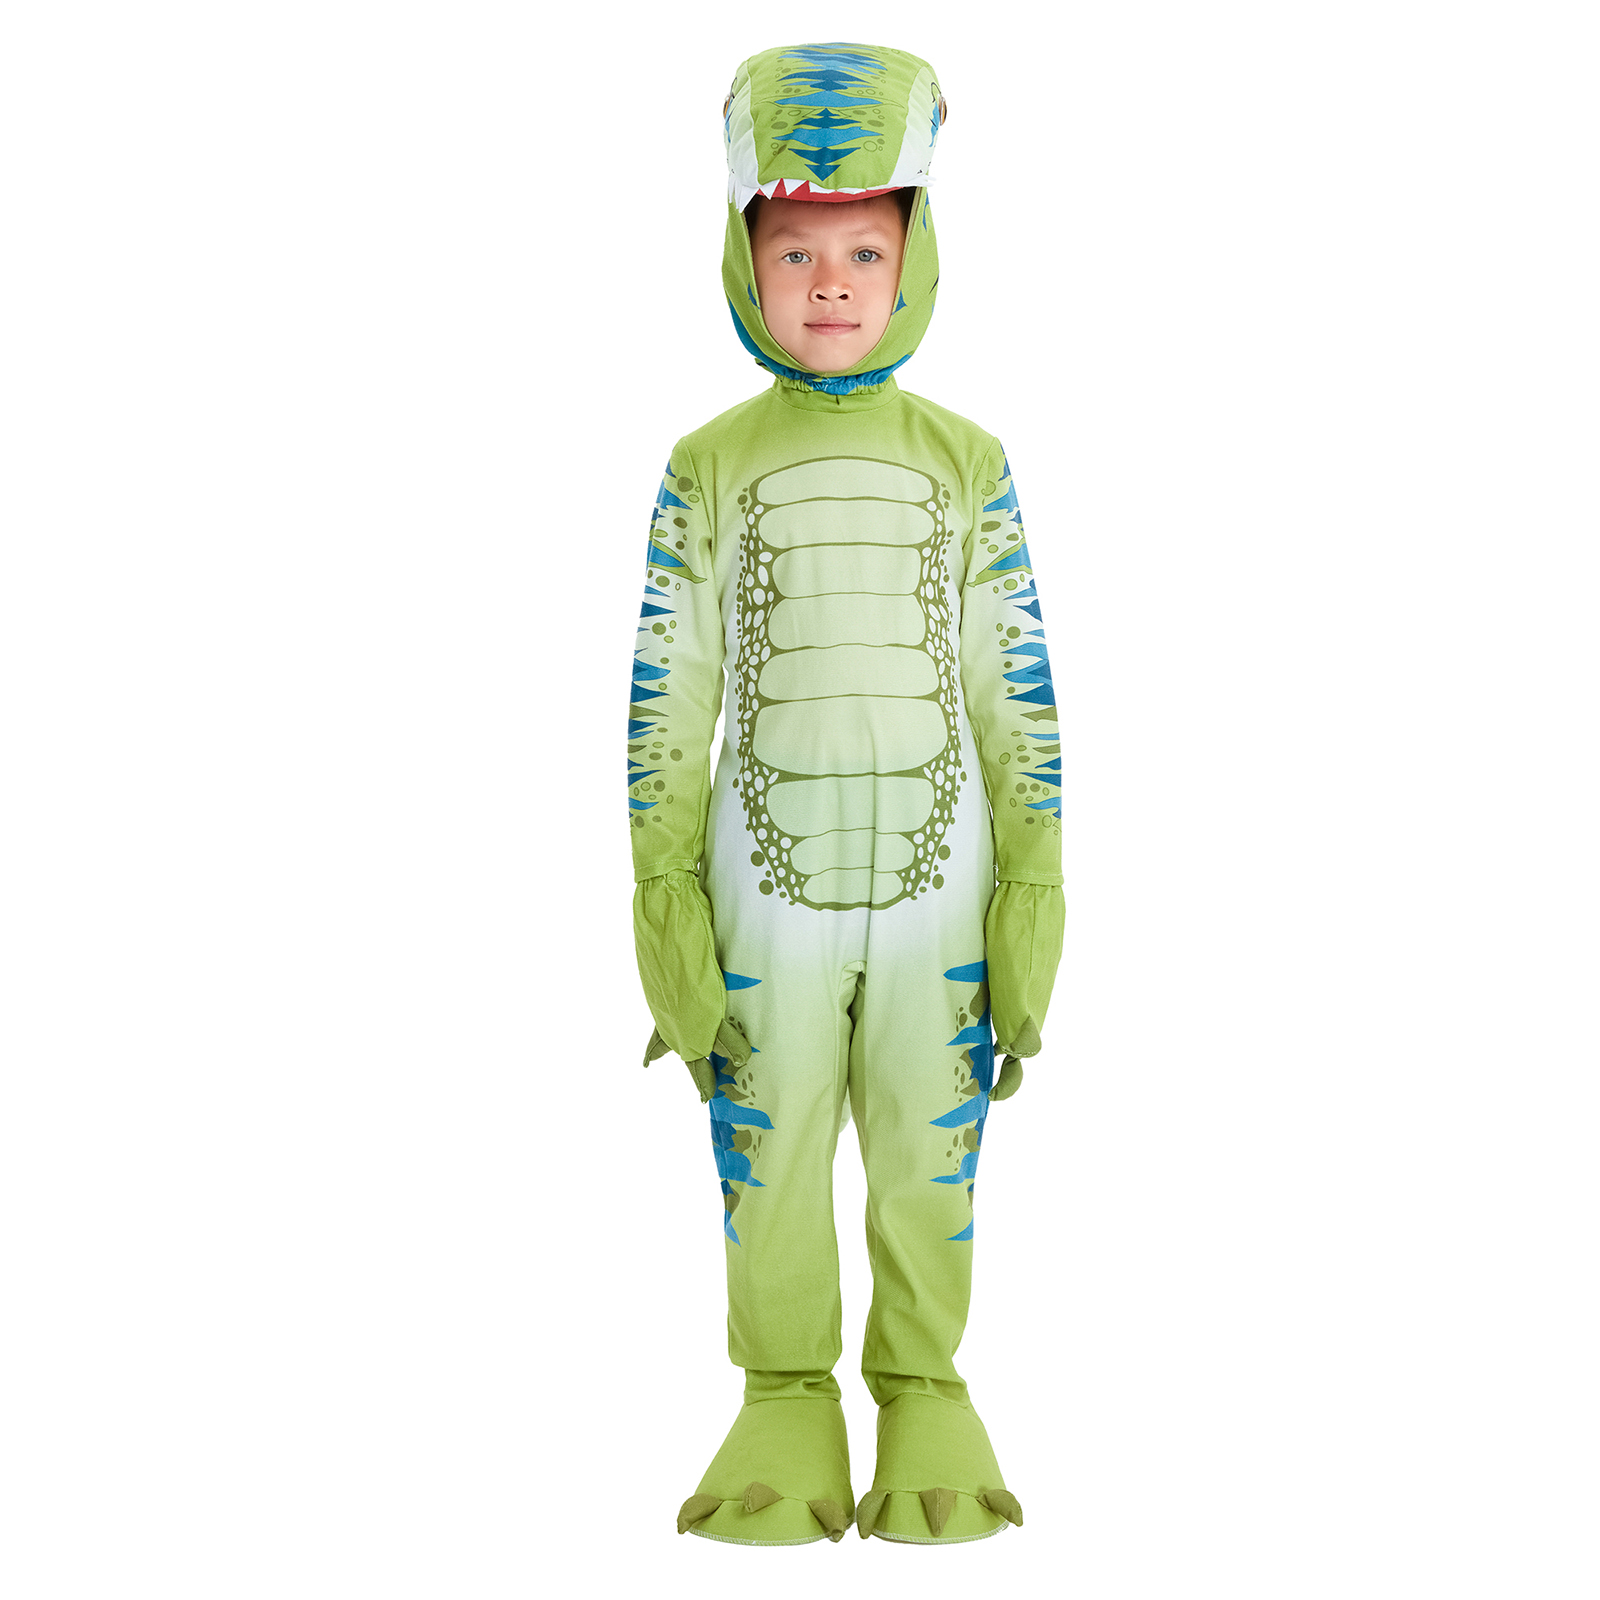 Tsseiatte Dinosaur Costume for Kids, Realistic T-Rex Costume with Tail ...